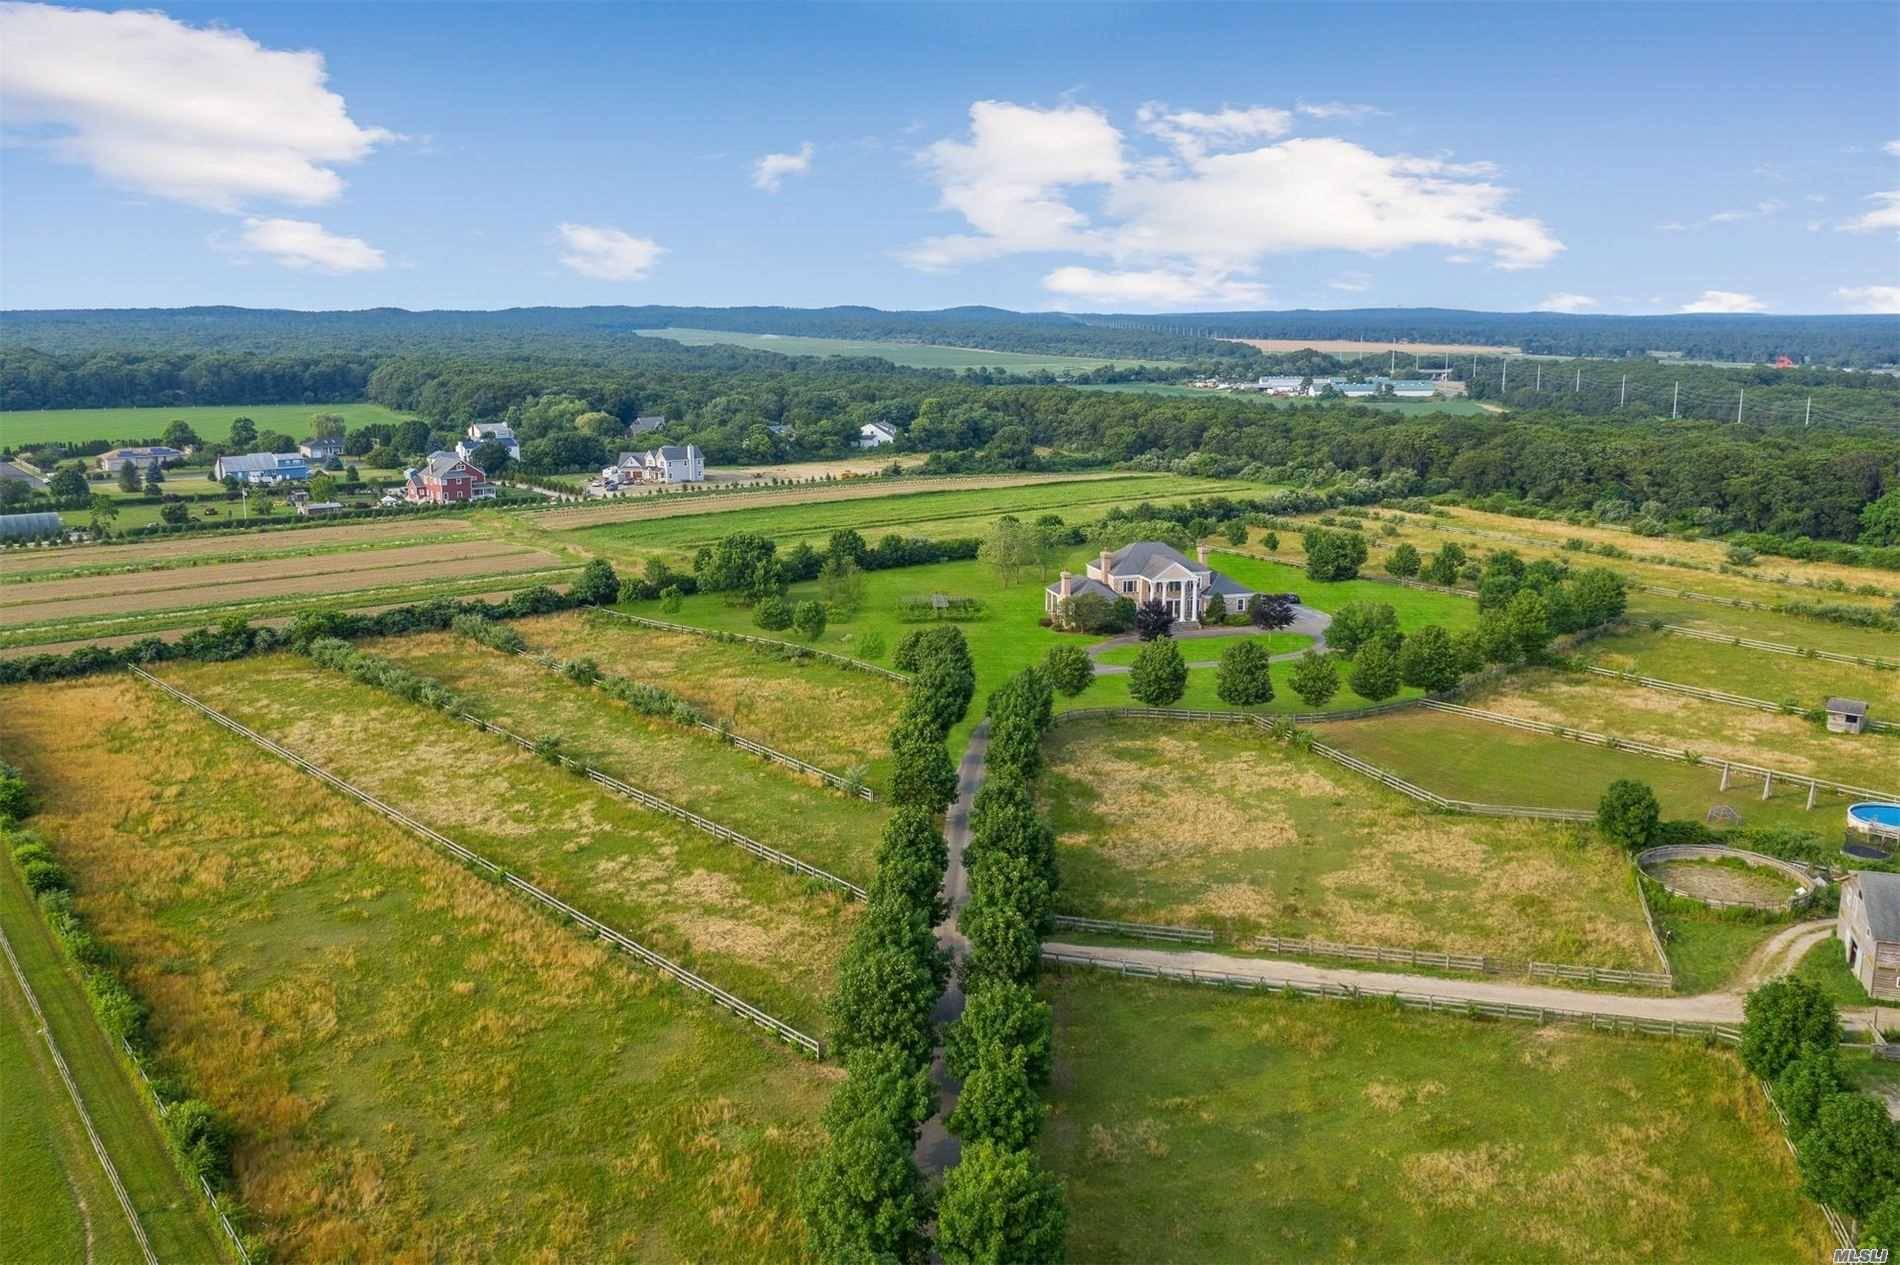 ENDLESS POSSIBILITIES ON THIS UNMATCHED 29 ACRE ESTATE.